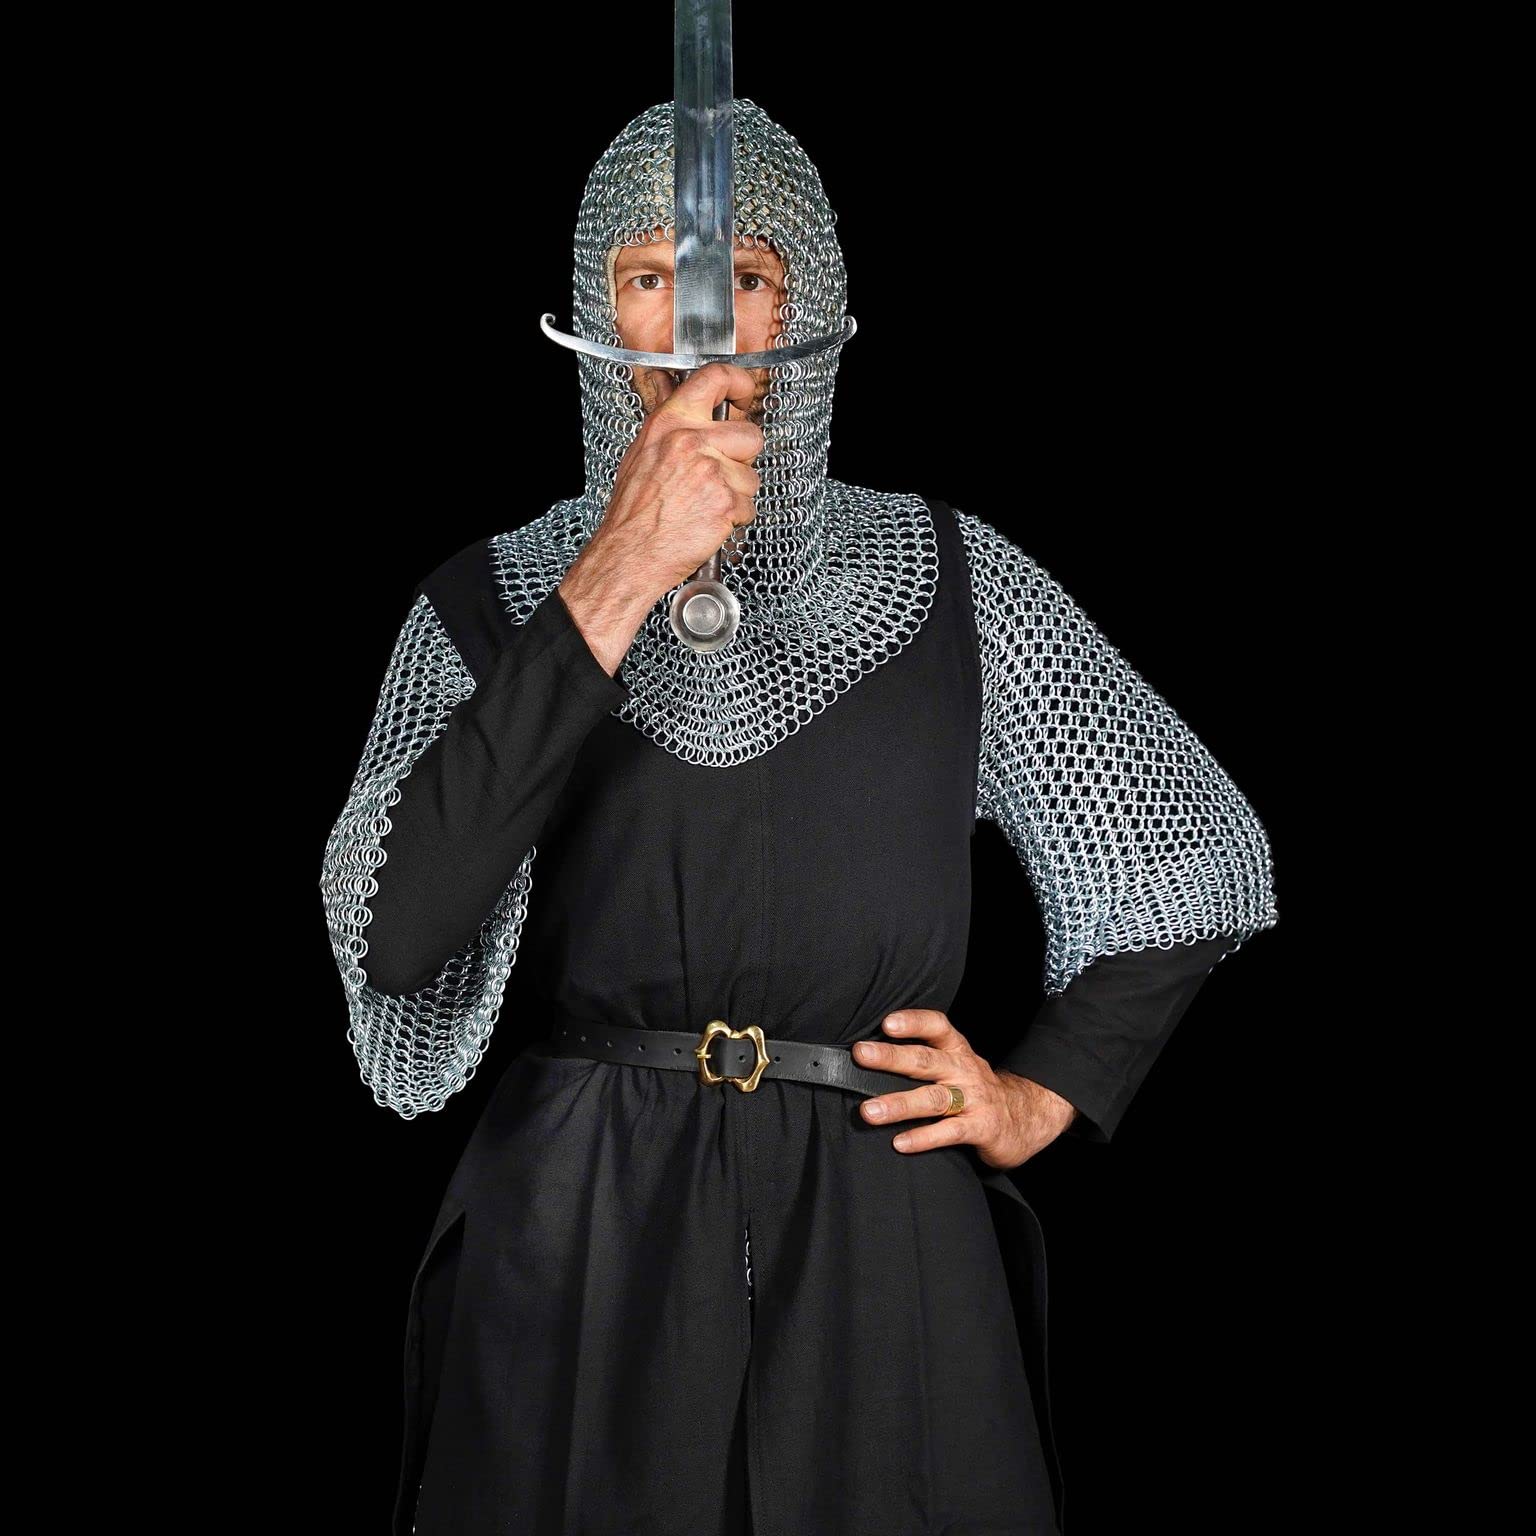 Silver Chainmail (Medium Size)